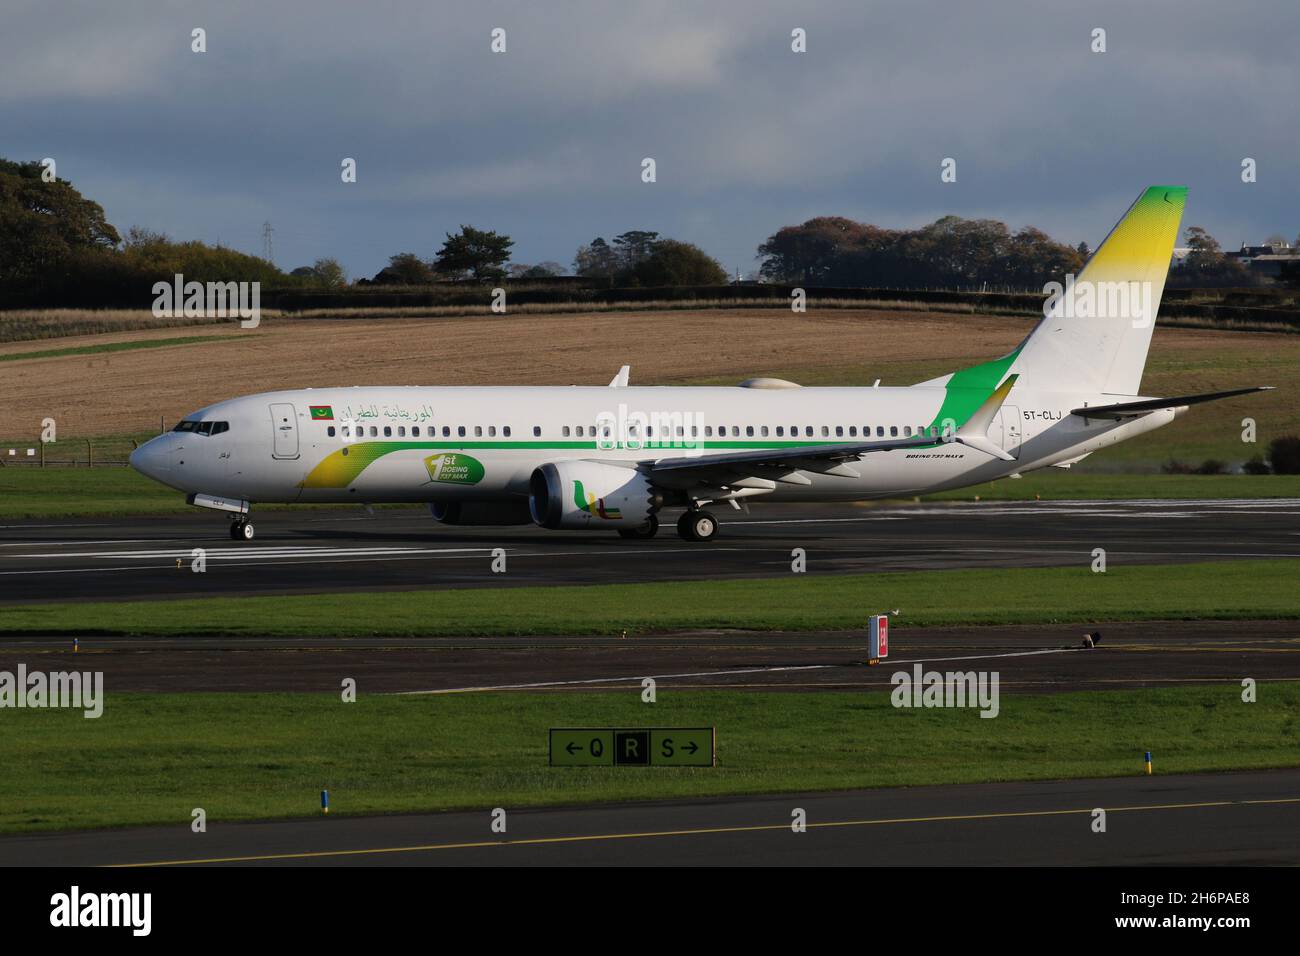 5T-CLJ, a Boeing 737 MAX 8 operated by Mauritania Airlines, departing from Prestwick International Airport in Ayrshire, Scotland, The aircraft was in Scotland to bring Mauritanian delegates to the COP26 climate change conference held in the nearby city of Glasgow. Stock Photo